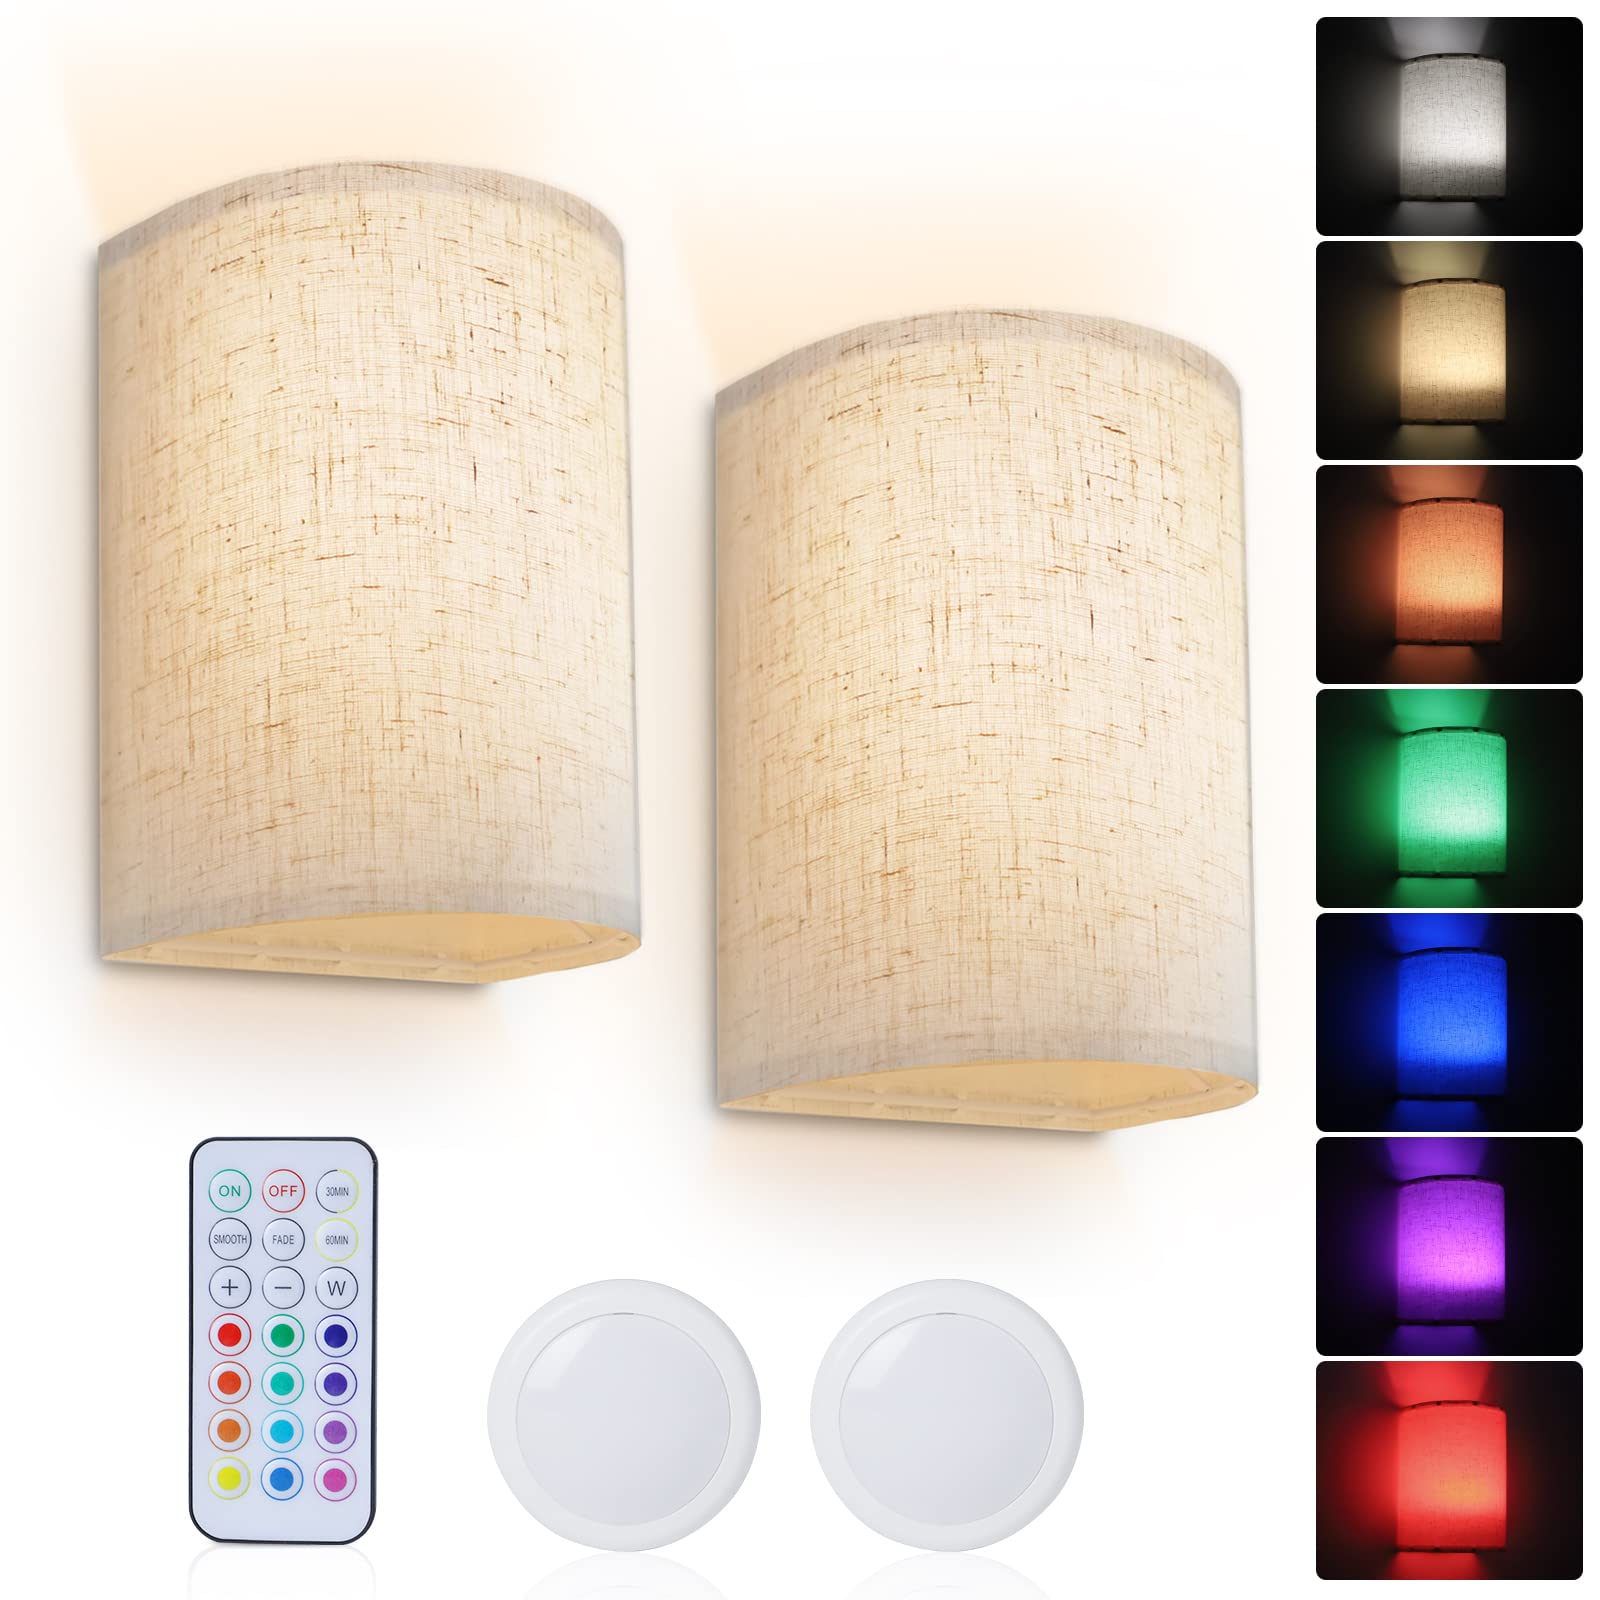 PESUTEN Wall Sconce Lighting Decor, Battery Rechargeable Wall Sconce Set of 2 with Fabric Shade Remote Control, 16 RGB Colors Changeable Dimmable Wall Lamp Fixtures for Bedroom Living Room Hallway